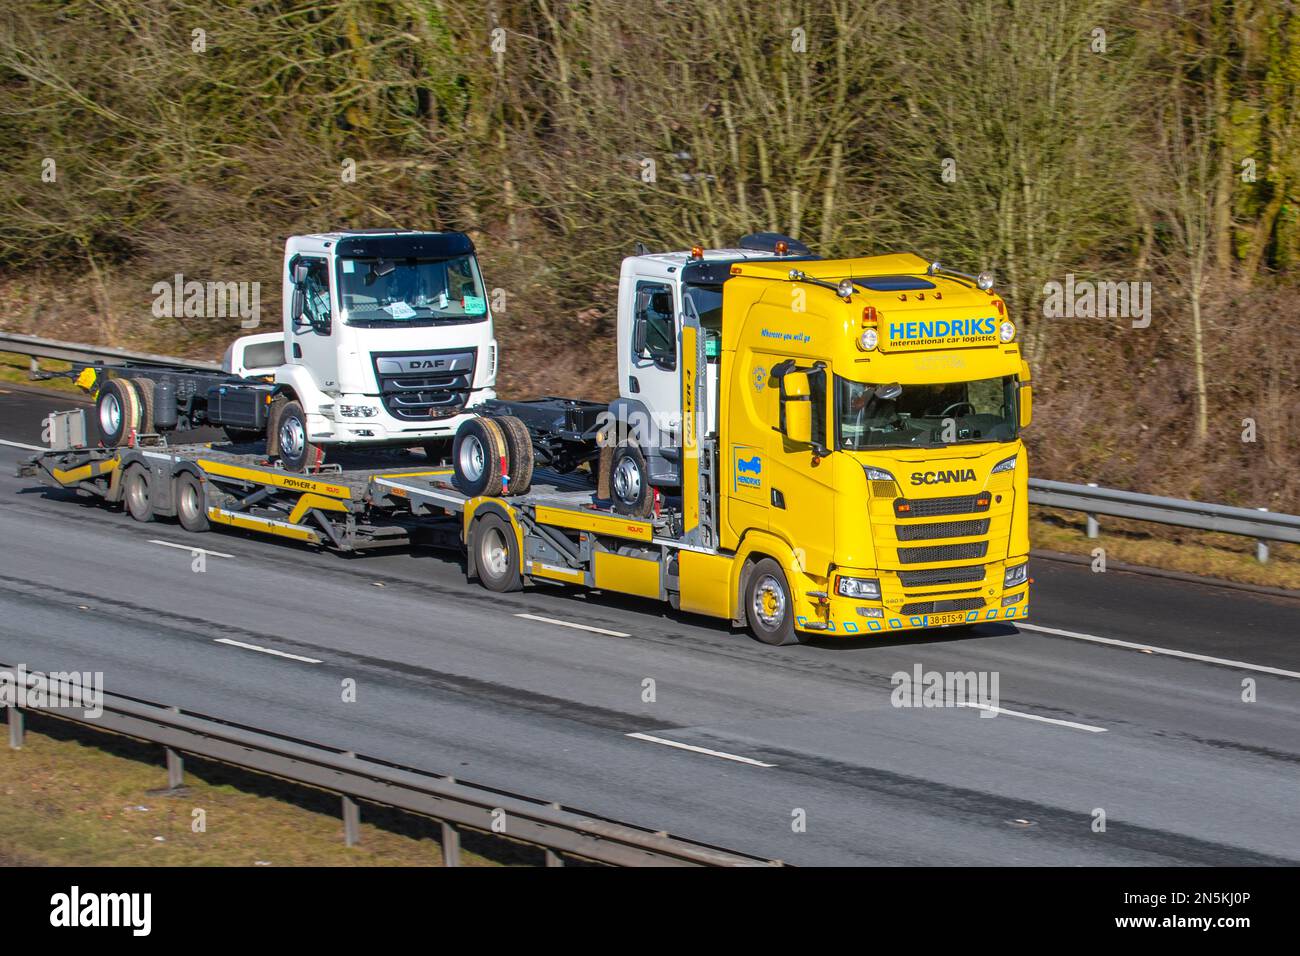 HENDRICKS International Car Transporter SCANIA 590 S towing ROLFO trailer carrying New DAF LF tractor units; travelling on the M61 motorway UK Stock Photo